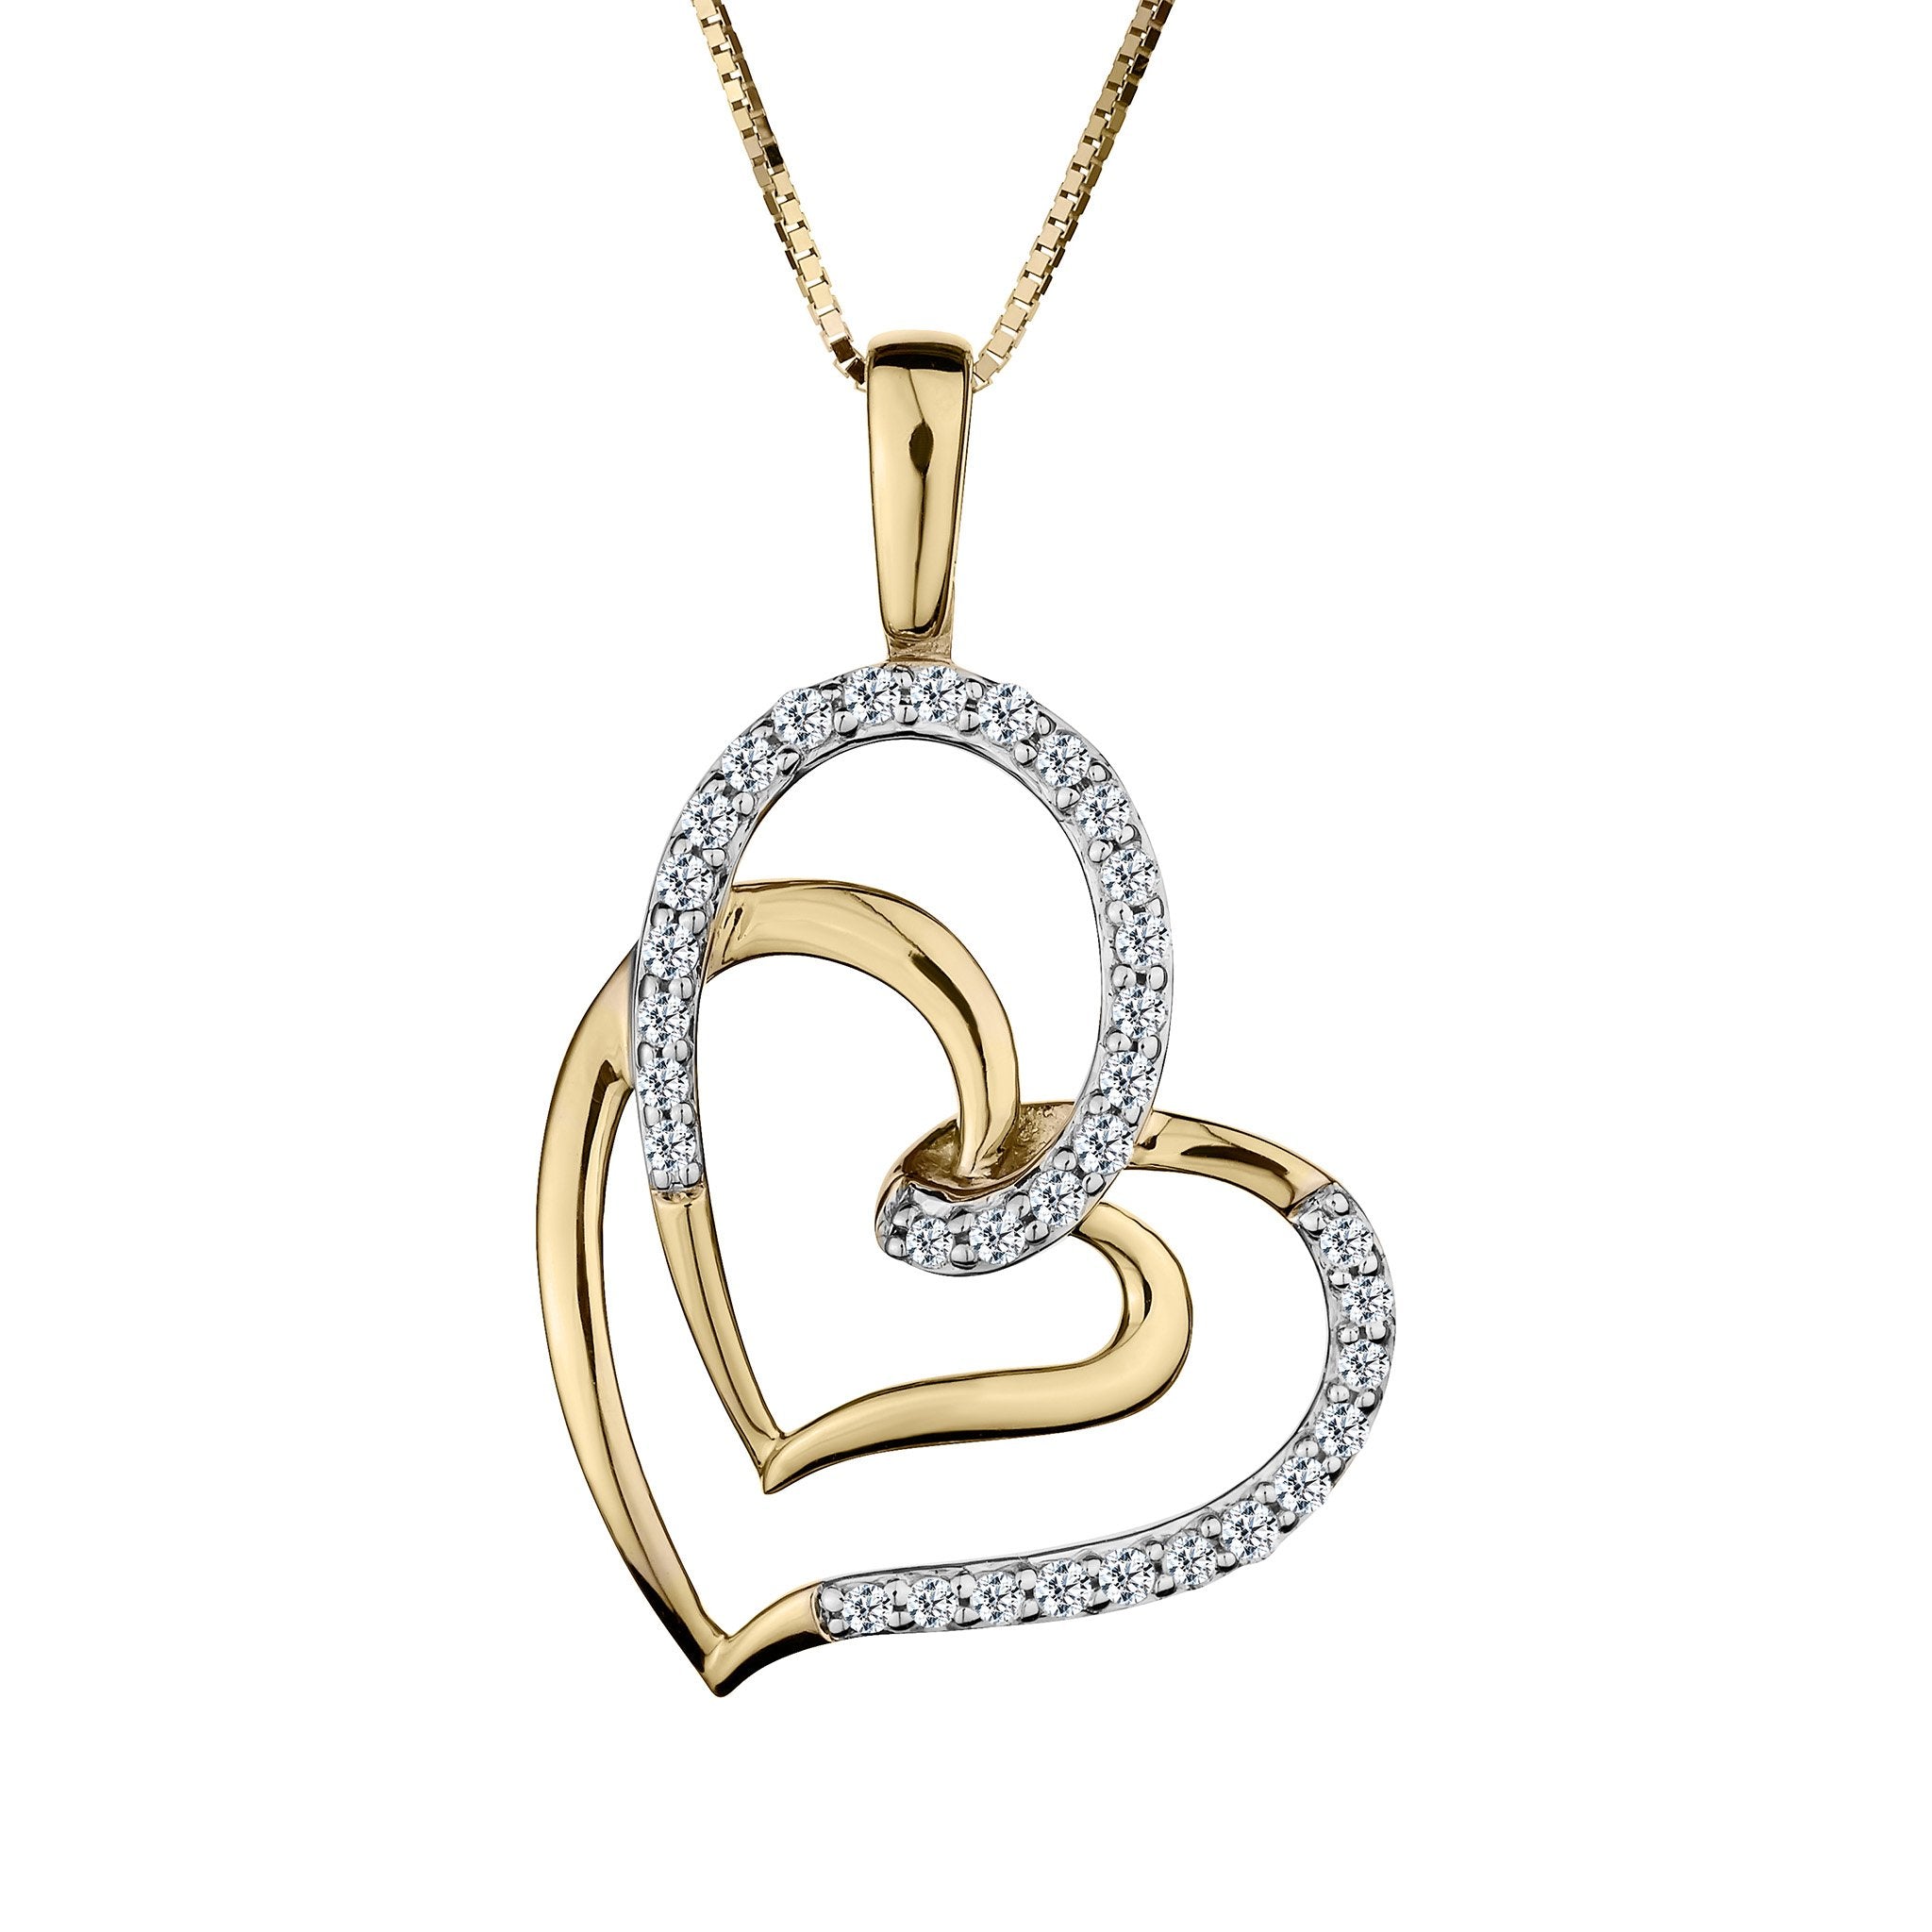 .16 Carat Diamond Double Heart Pendant,   10kt Yellow Gold. Necklaces and Pendants. Griffin Jewellery Designs.